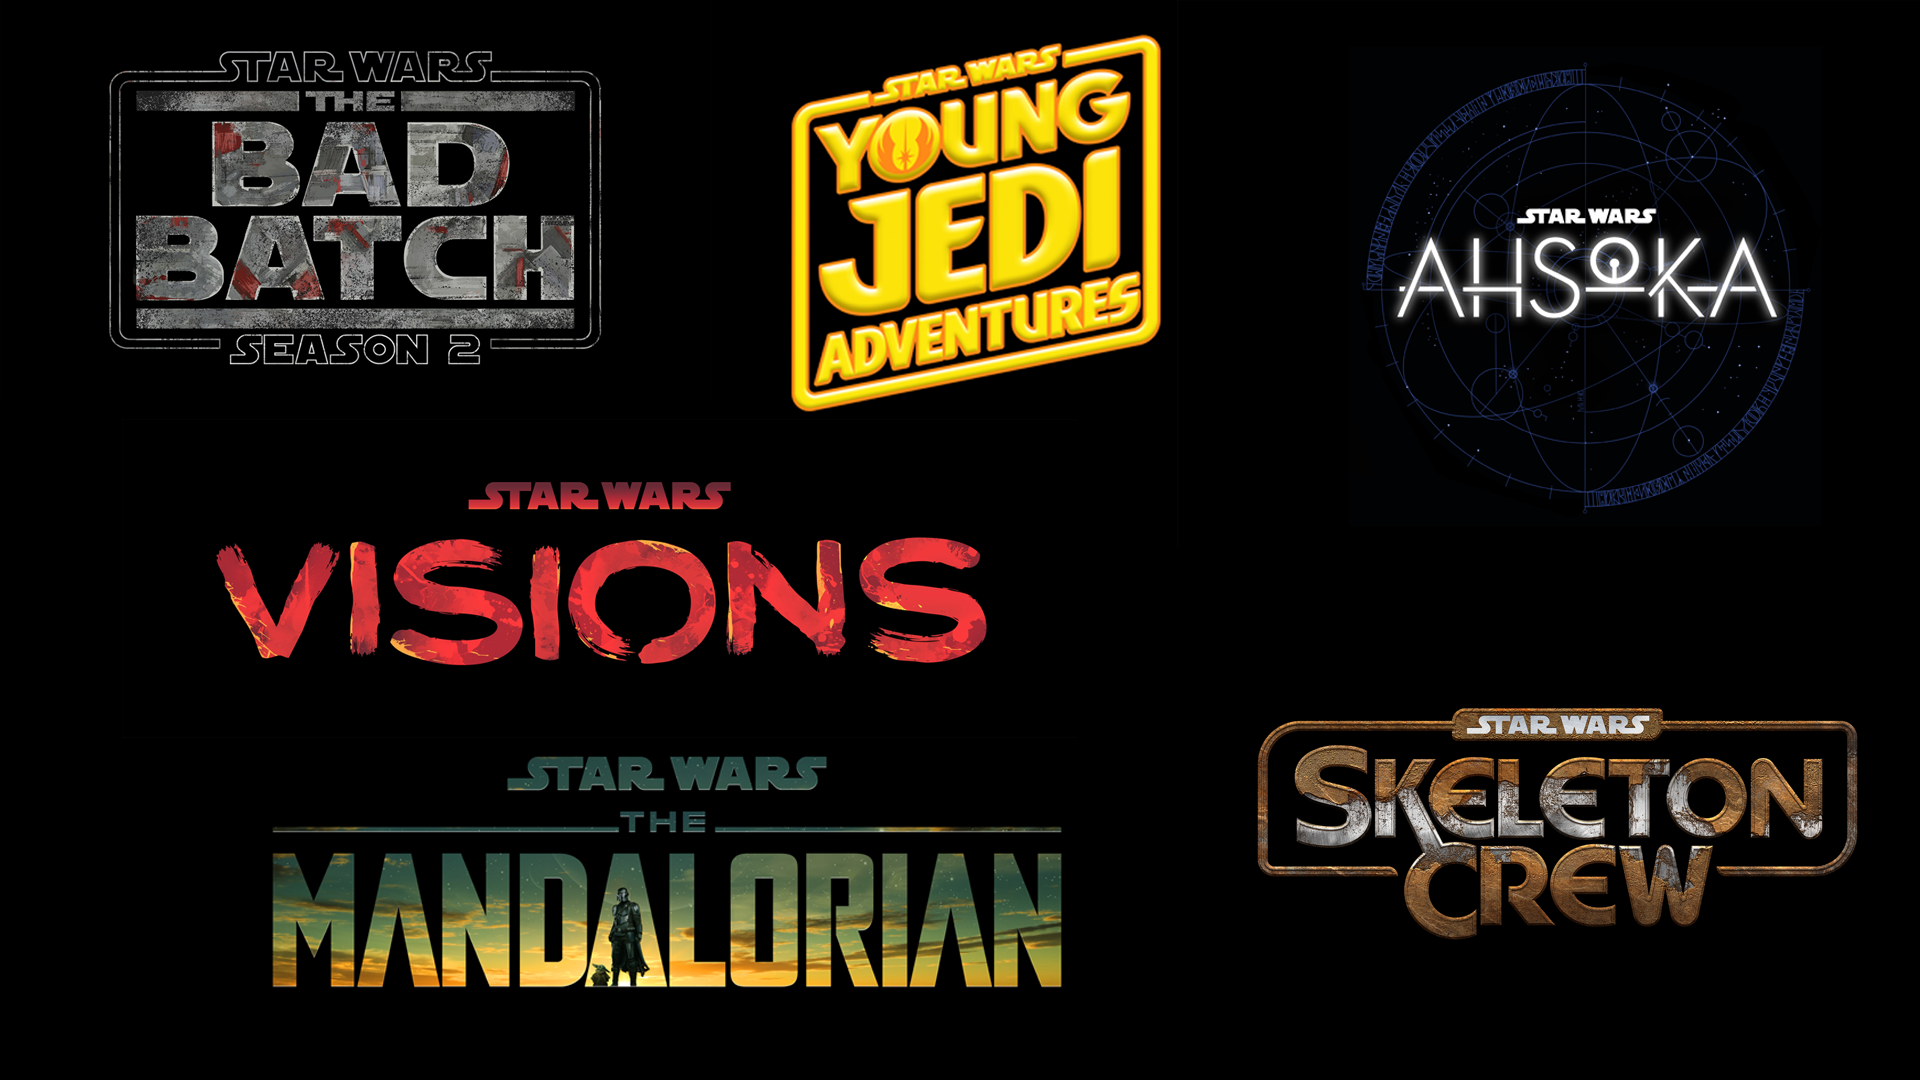 Disney Reveals Full List of 'Star Wars' Content With Synopses for 2023